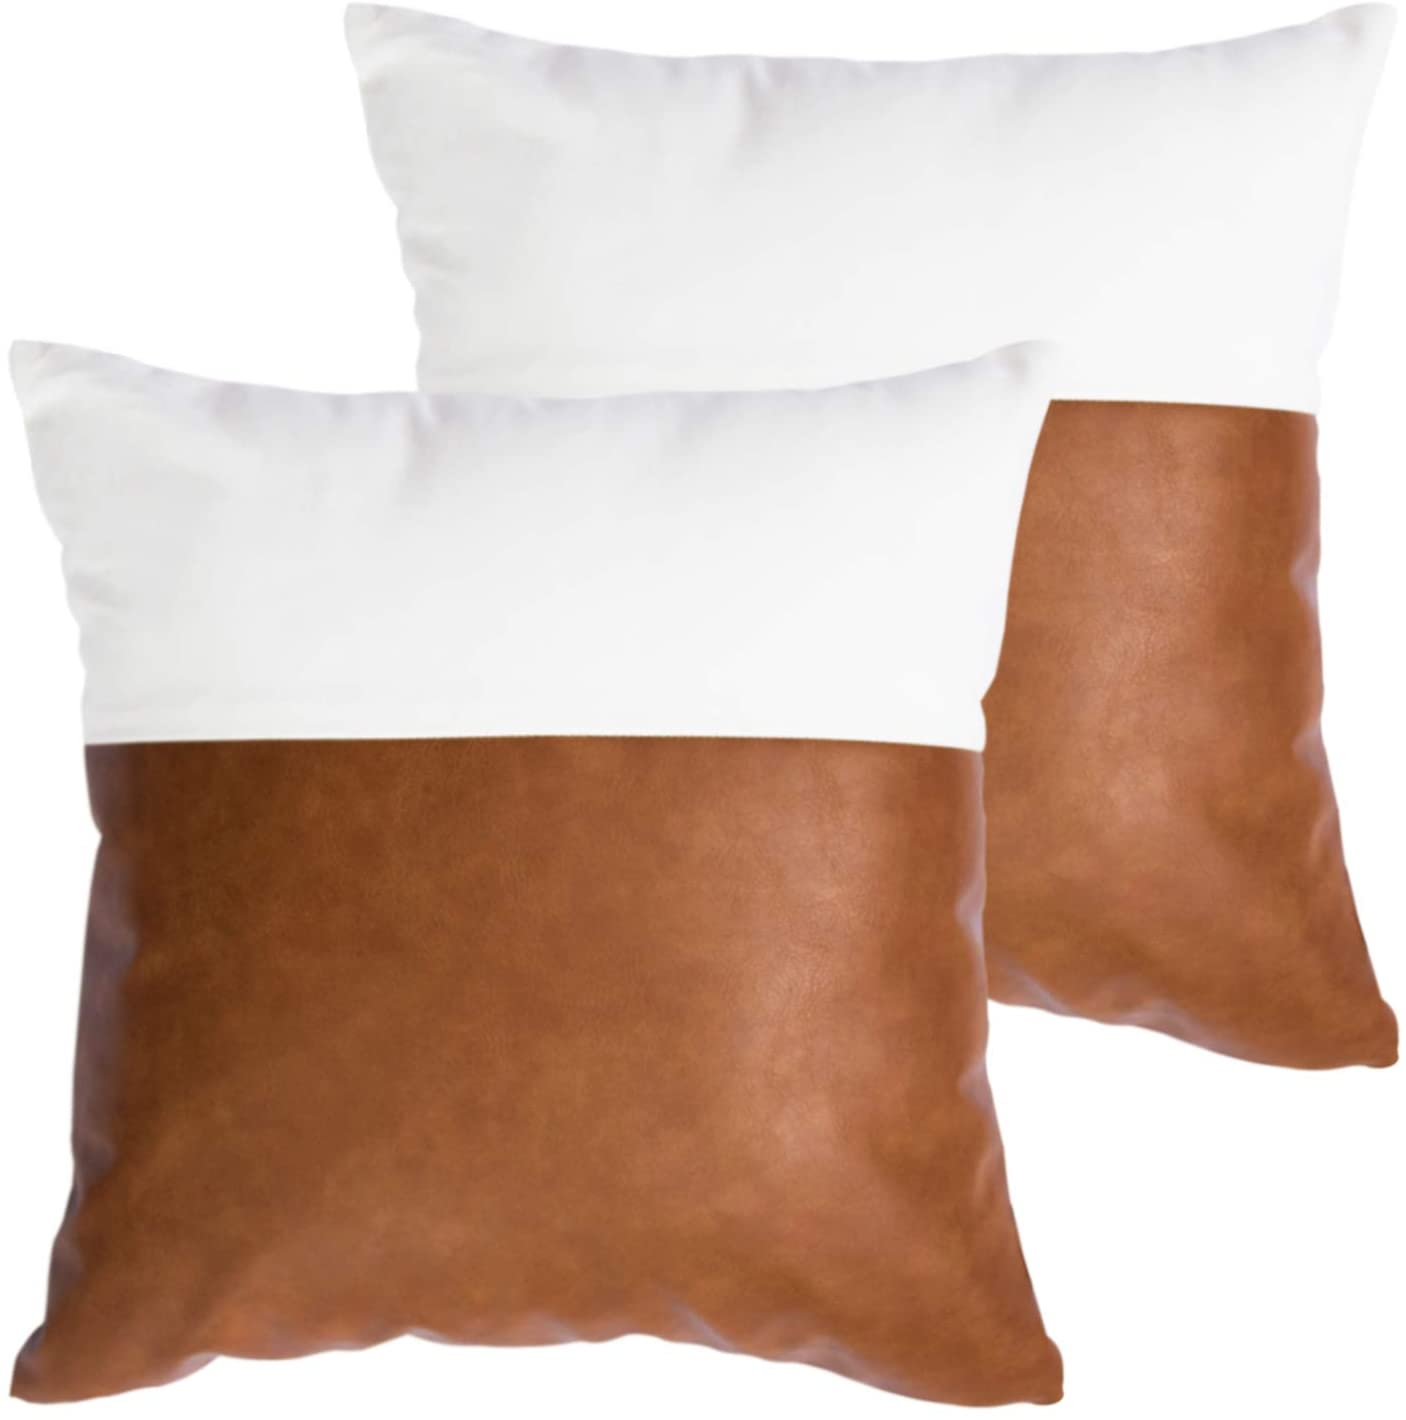 6 Mid Century Modern Throw Pillows From, Leather Throw Pillows For Couch